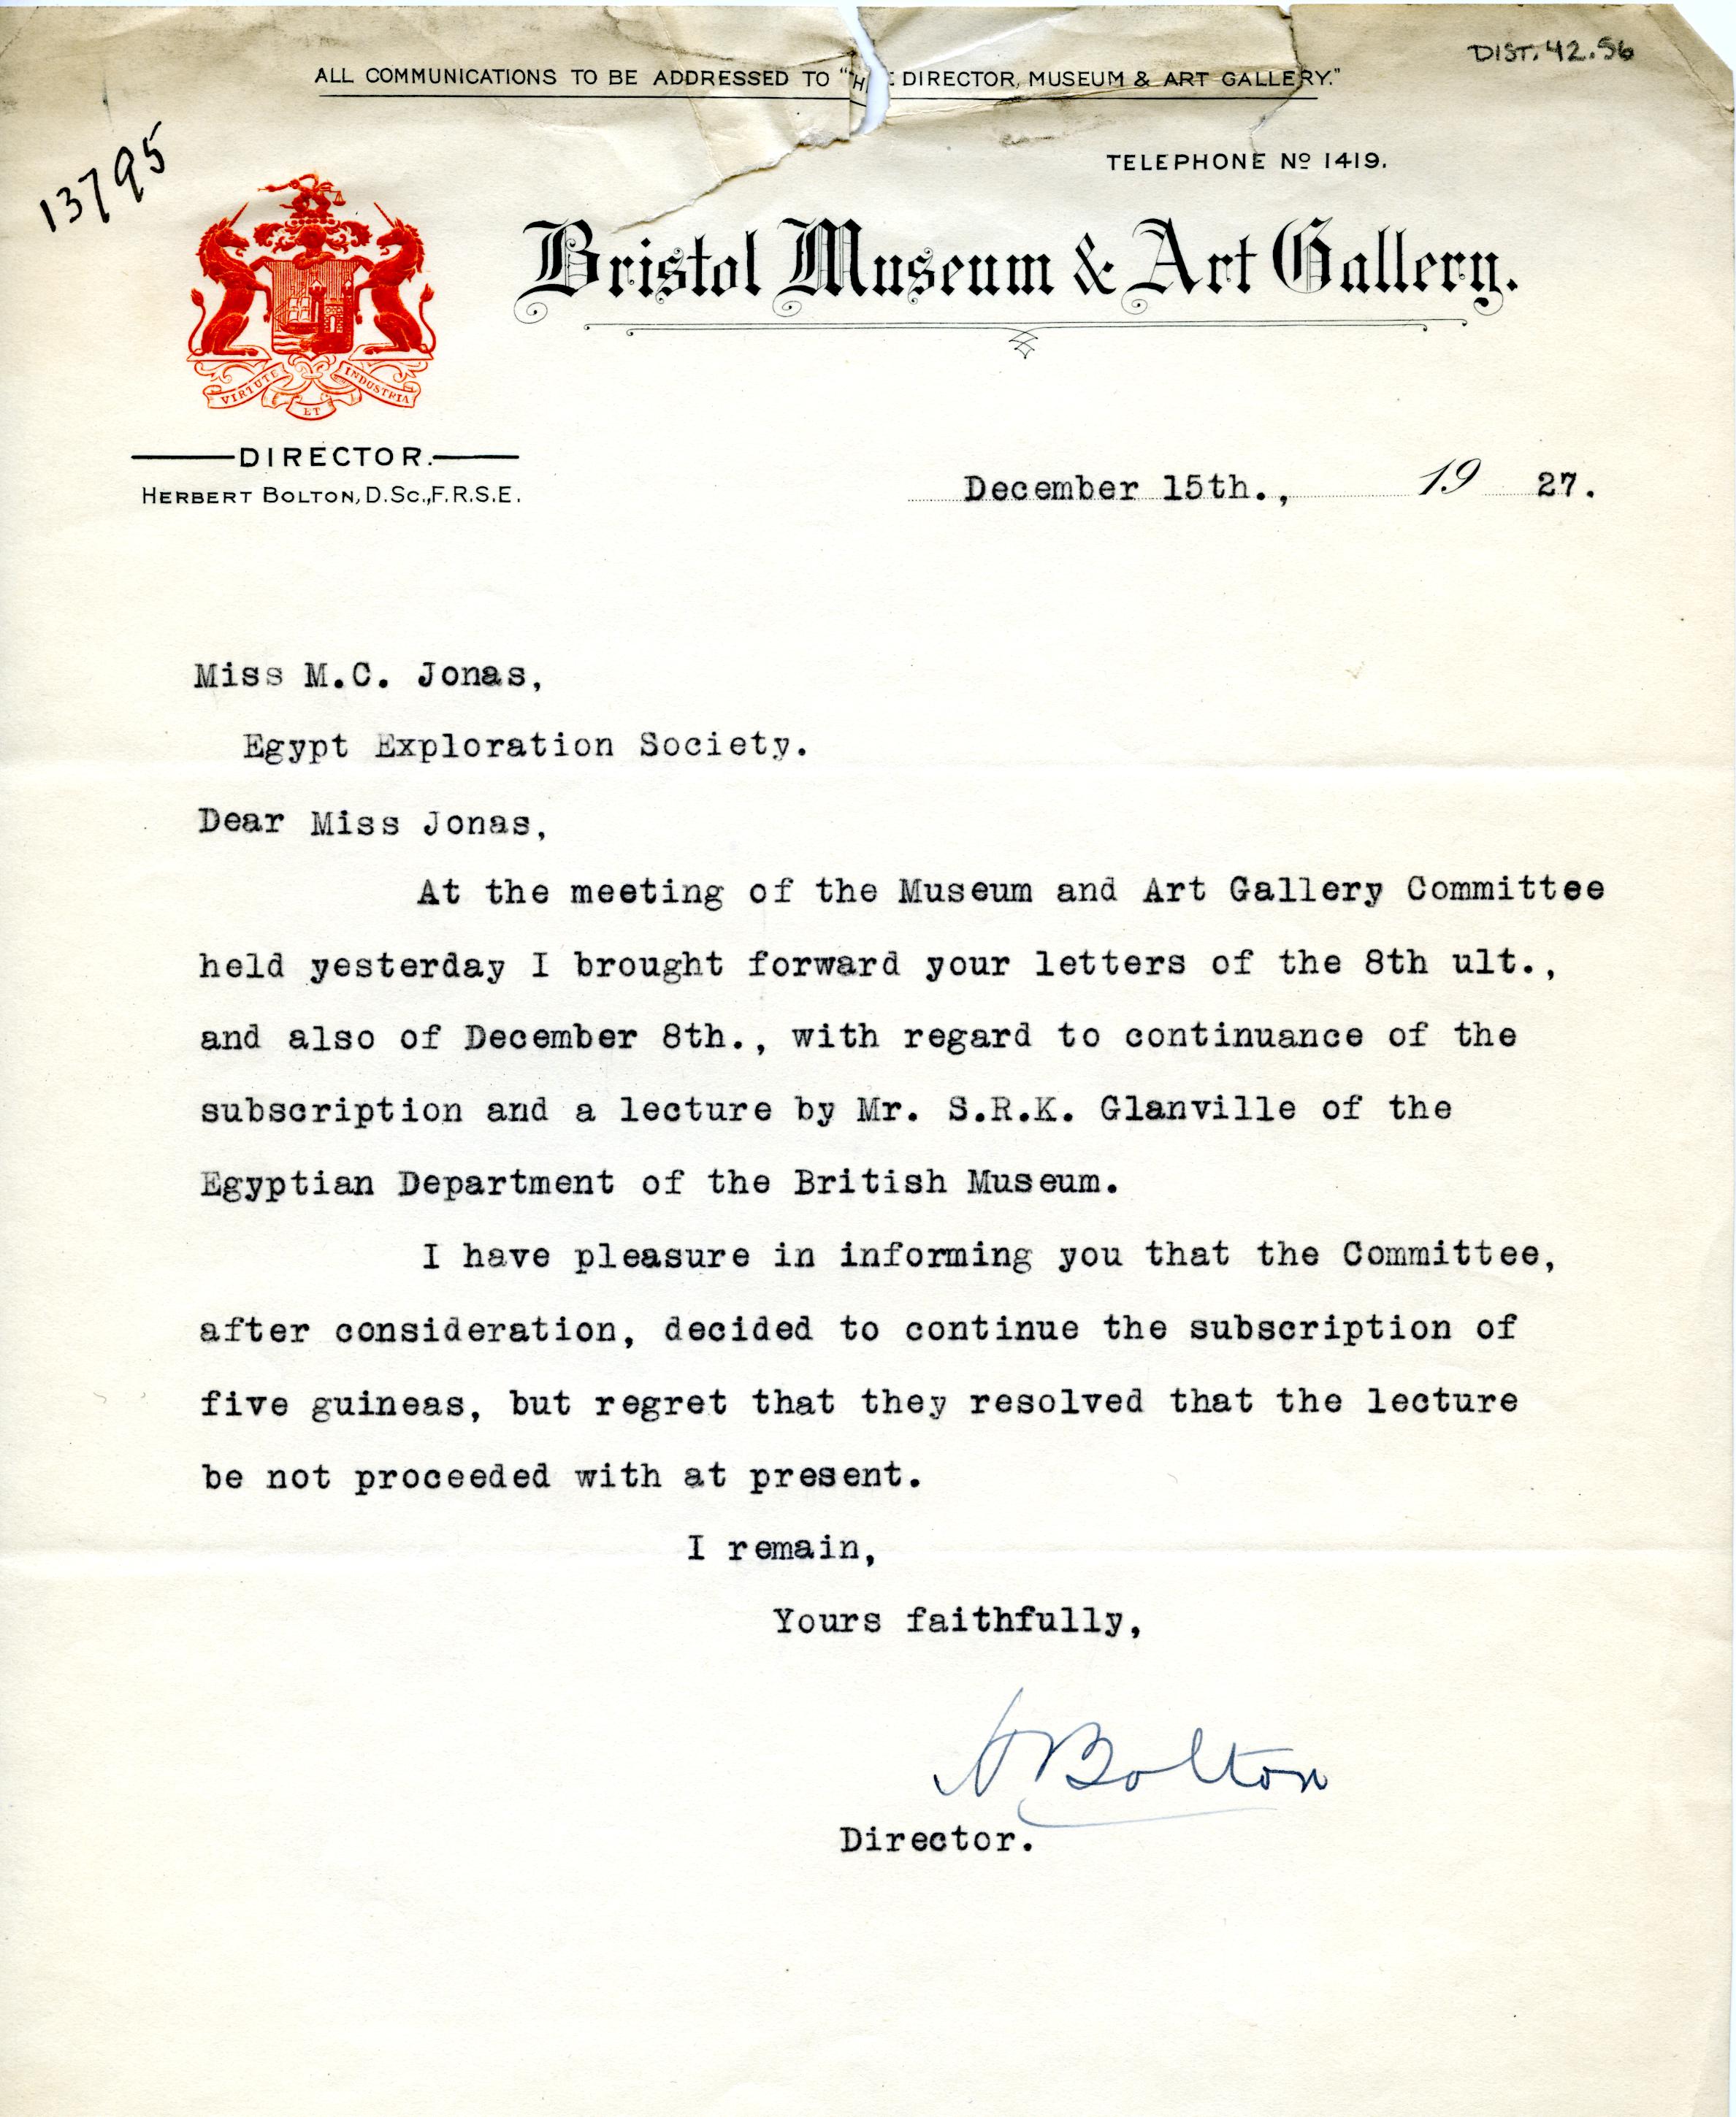 1922-71 Miscellaneous correspondence with museums DIST.42.56